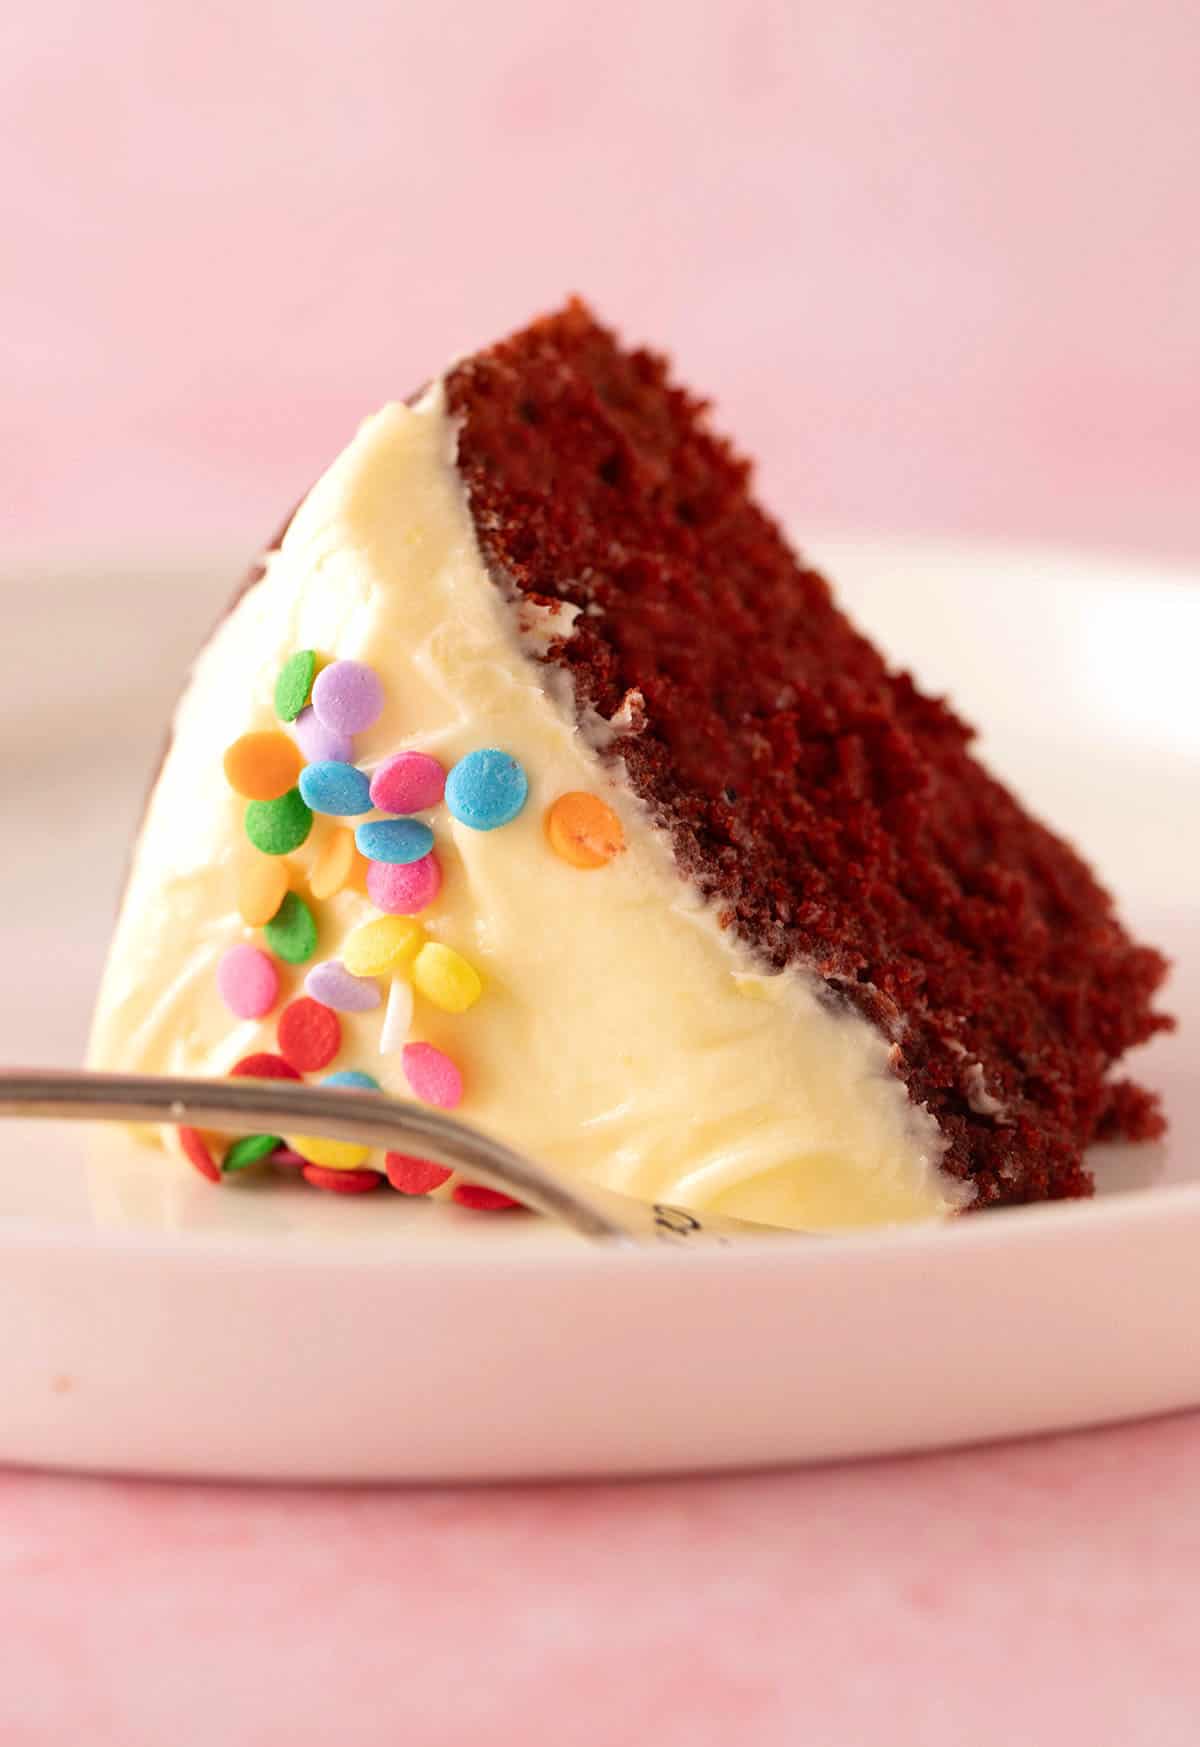 A beautiful slice of red velvet cake with sprinkles.